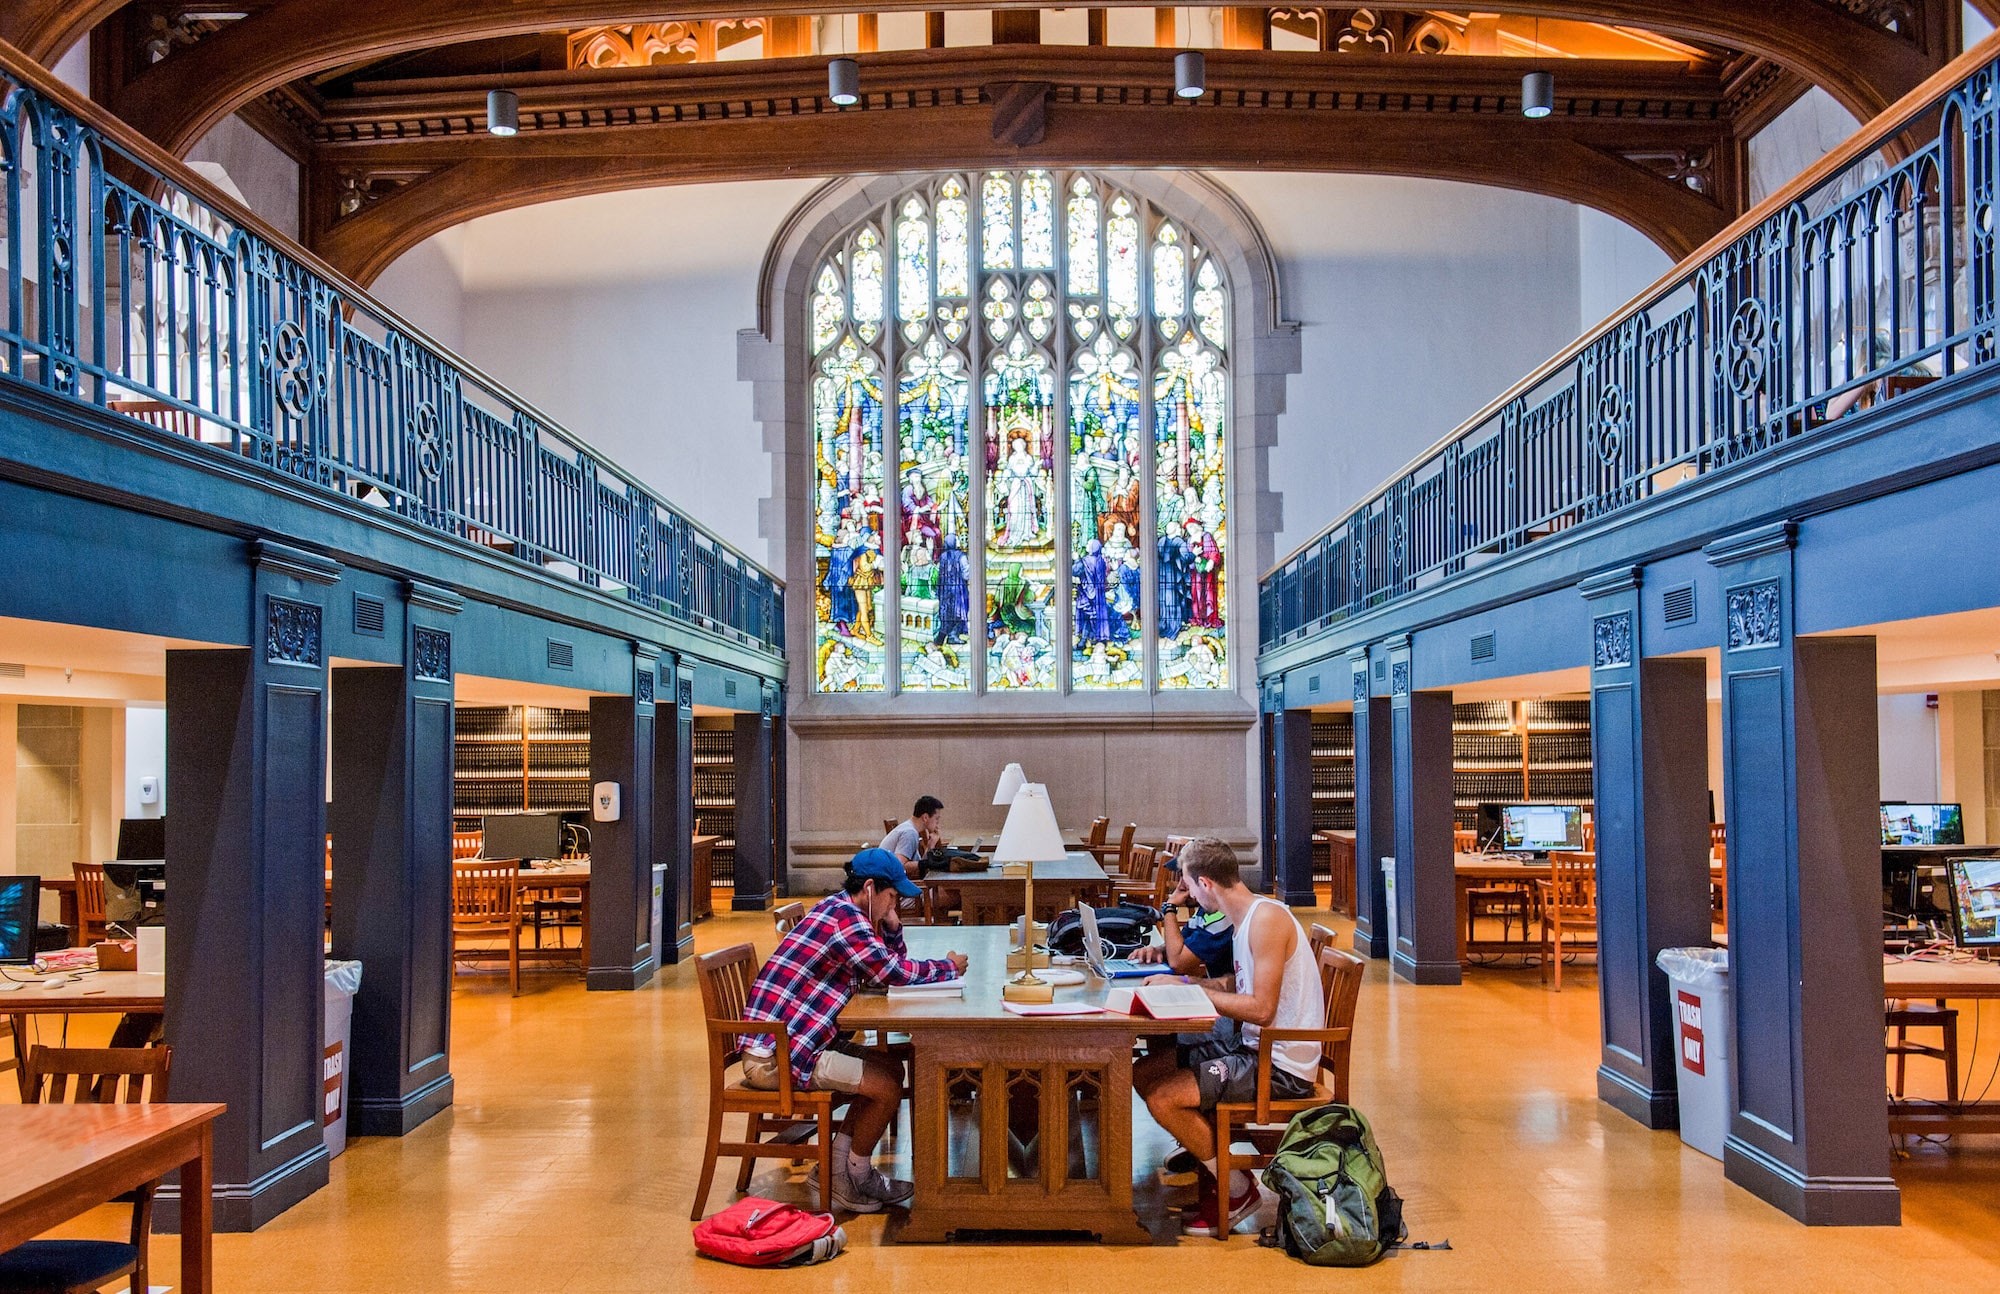 Students studying at desks in the Thompson Memorial Library